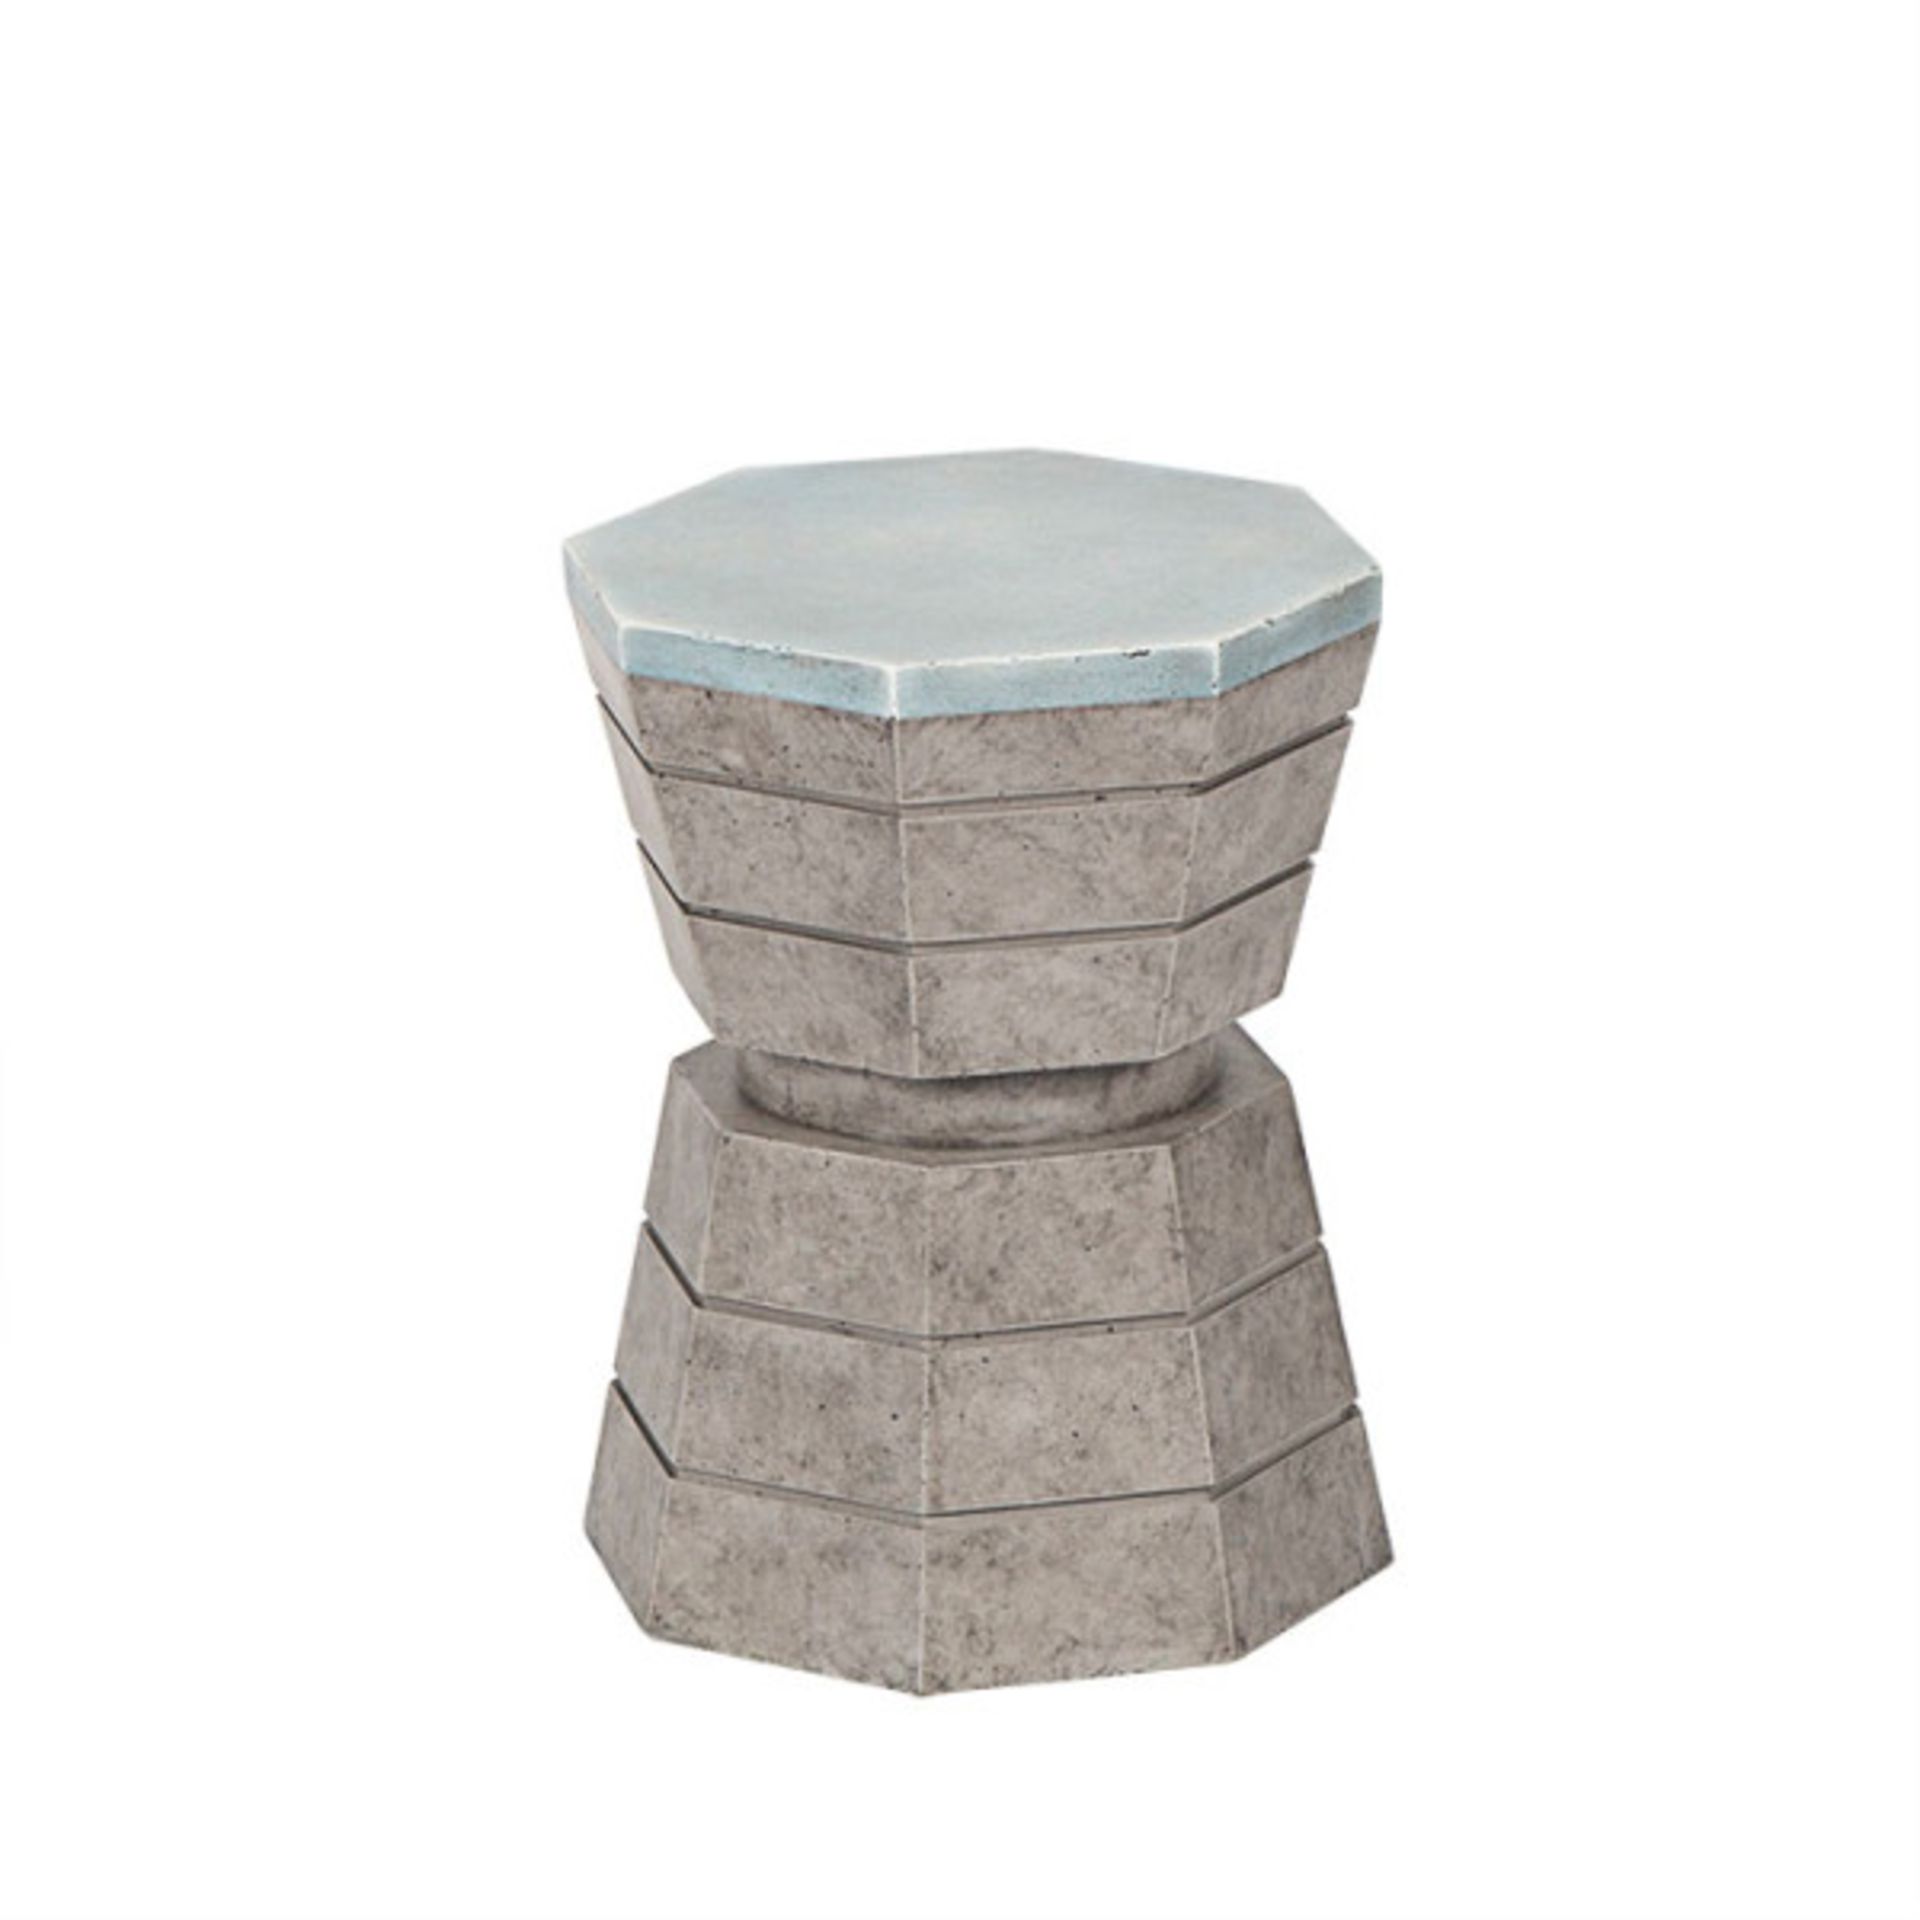 Tracey Boyd Seating Precast Barrista Stool - Blue Top MSRP £174